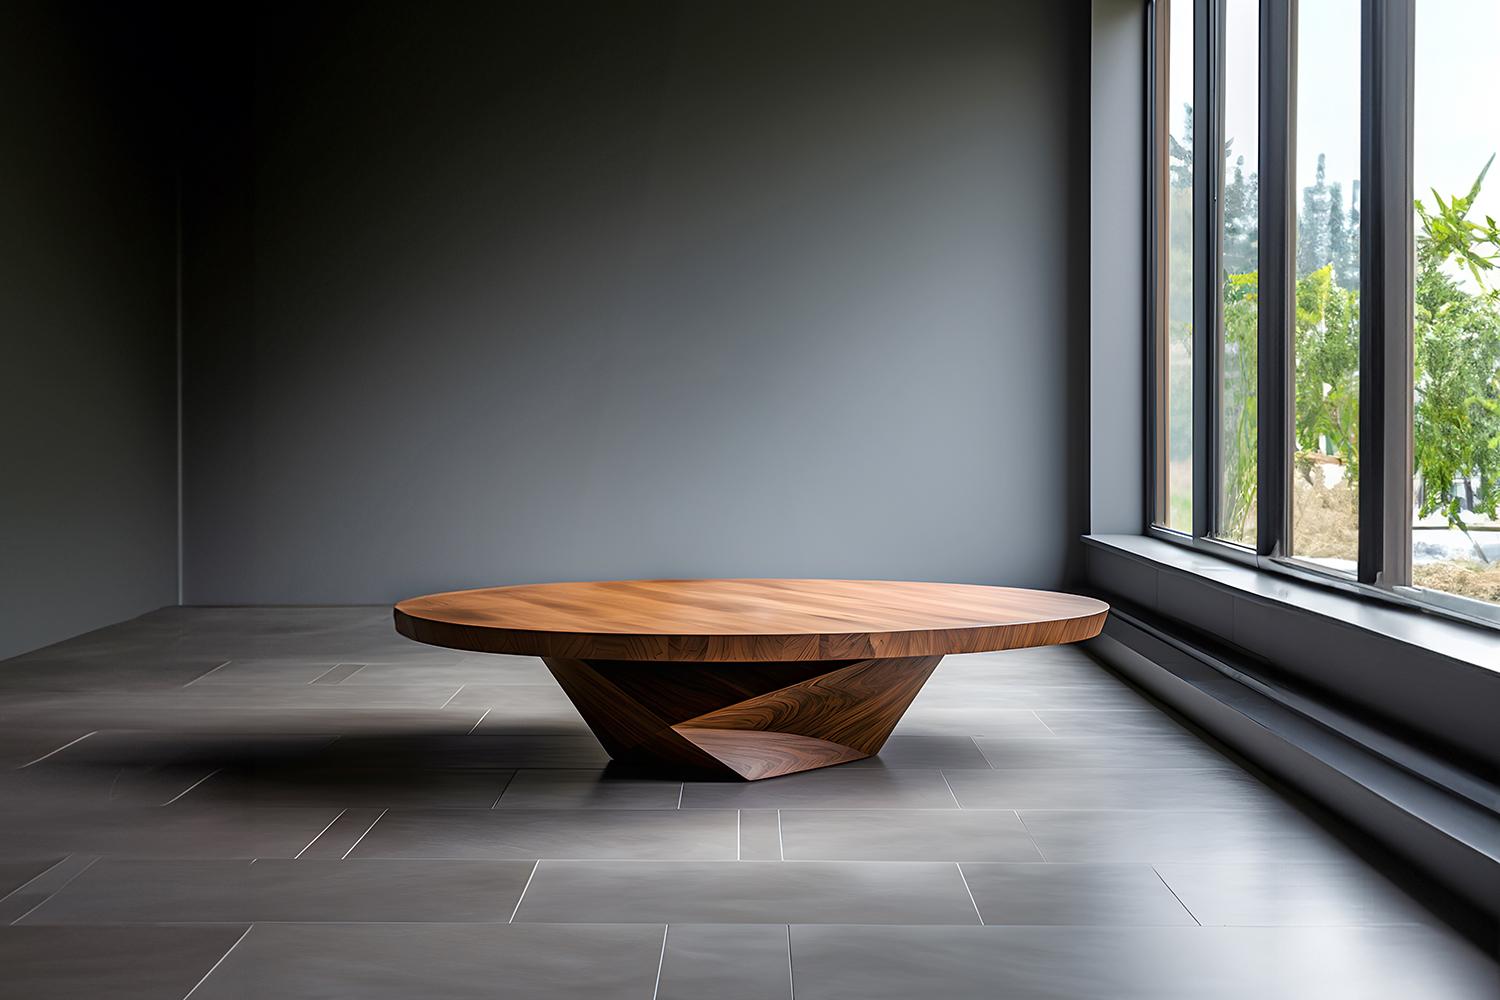 Sculptural Coffee Table Made of Solid Wood, Center Table Solace S28 by Joel Escalona


The Solace table series, designed by Joel Escalona, is a furniture collection that exudes balance and presence, thanks to its sensuous, dense, and irregular